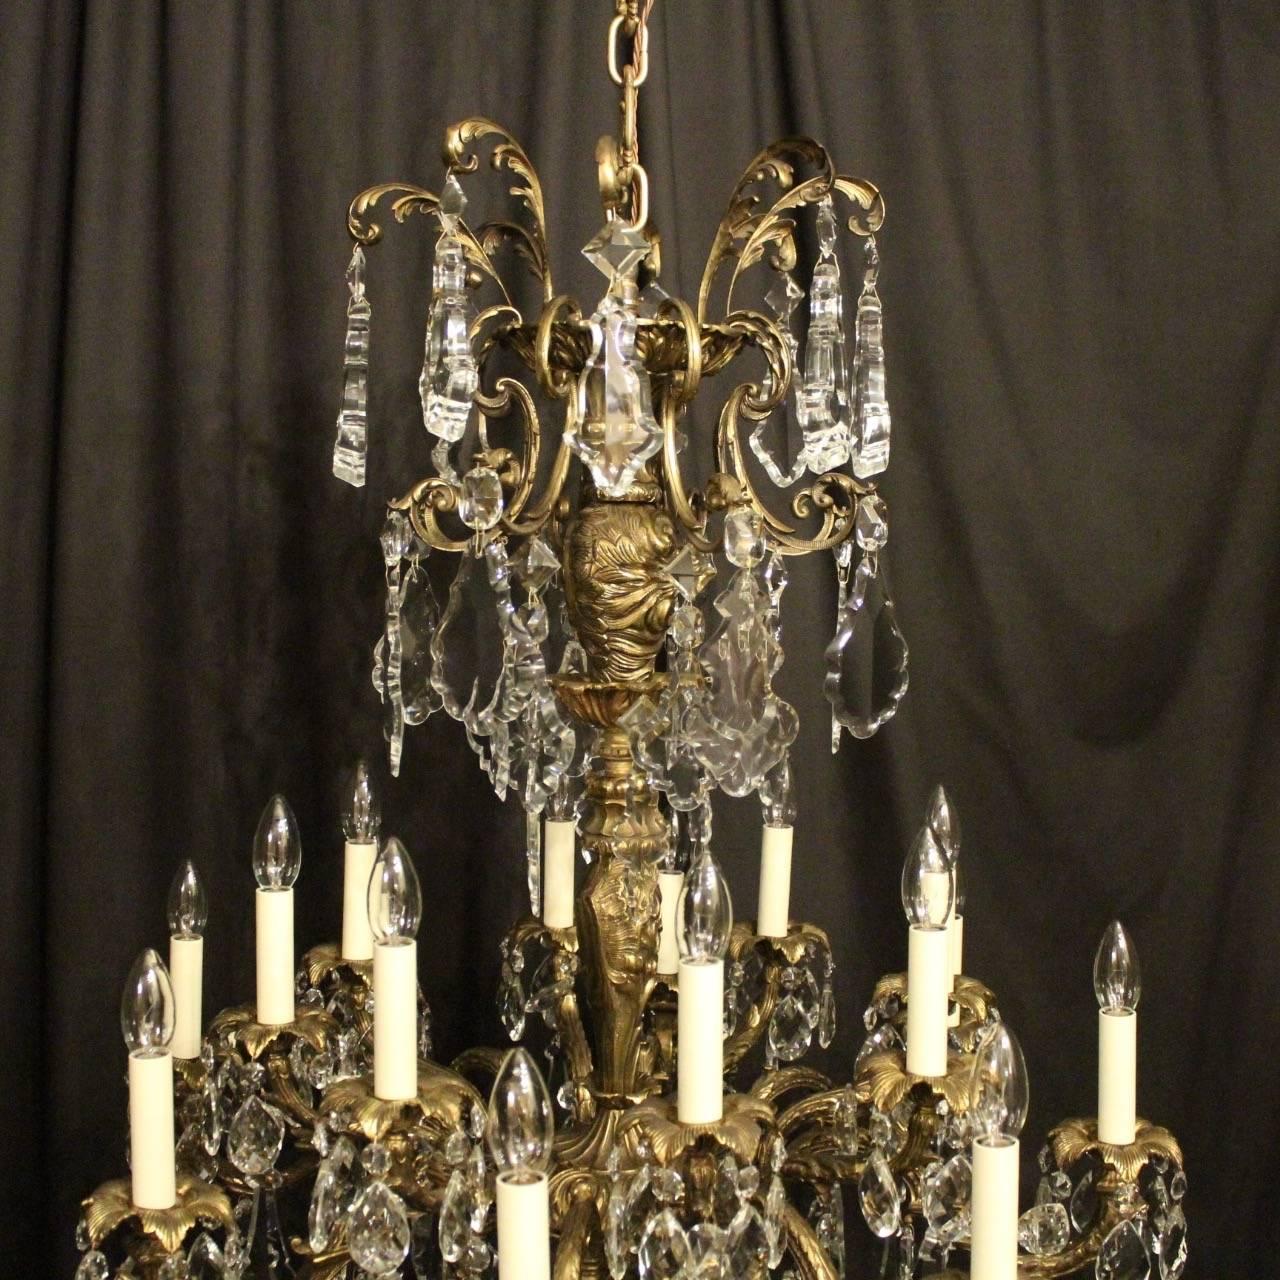 A large French gilded cast bronze and crystal sixteen-light double tiered antique chandelier, the eight and eight-light leaf scrolling arms with leaf bobeche drip pans, issuing from an ornate foliated baluster central column with a large scrolling